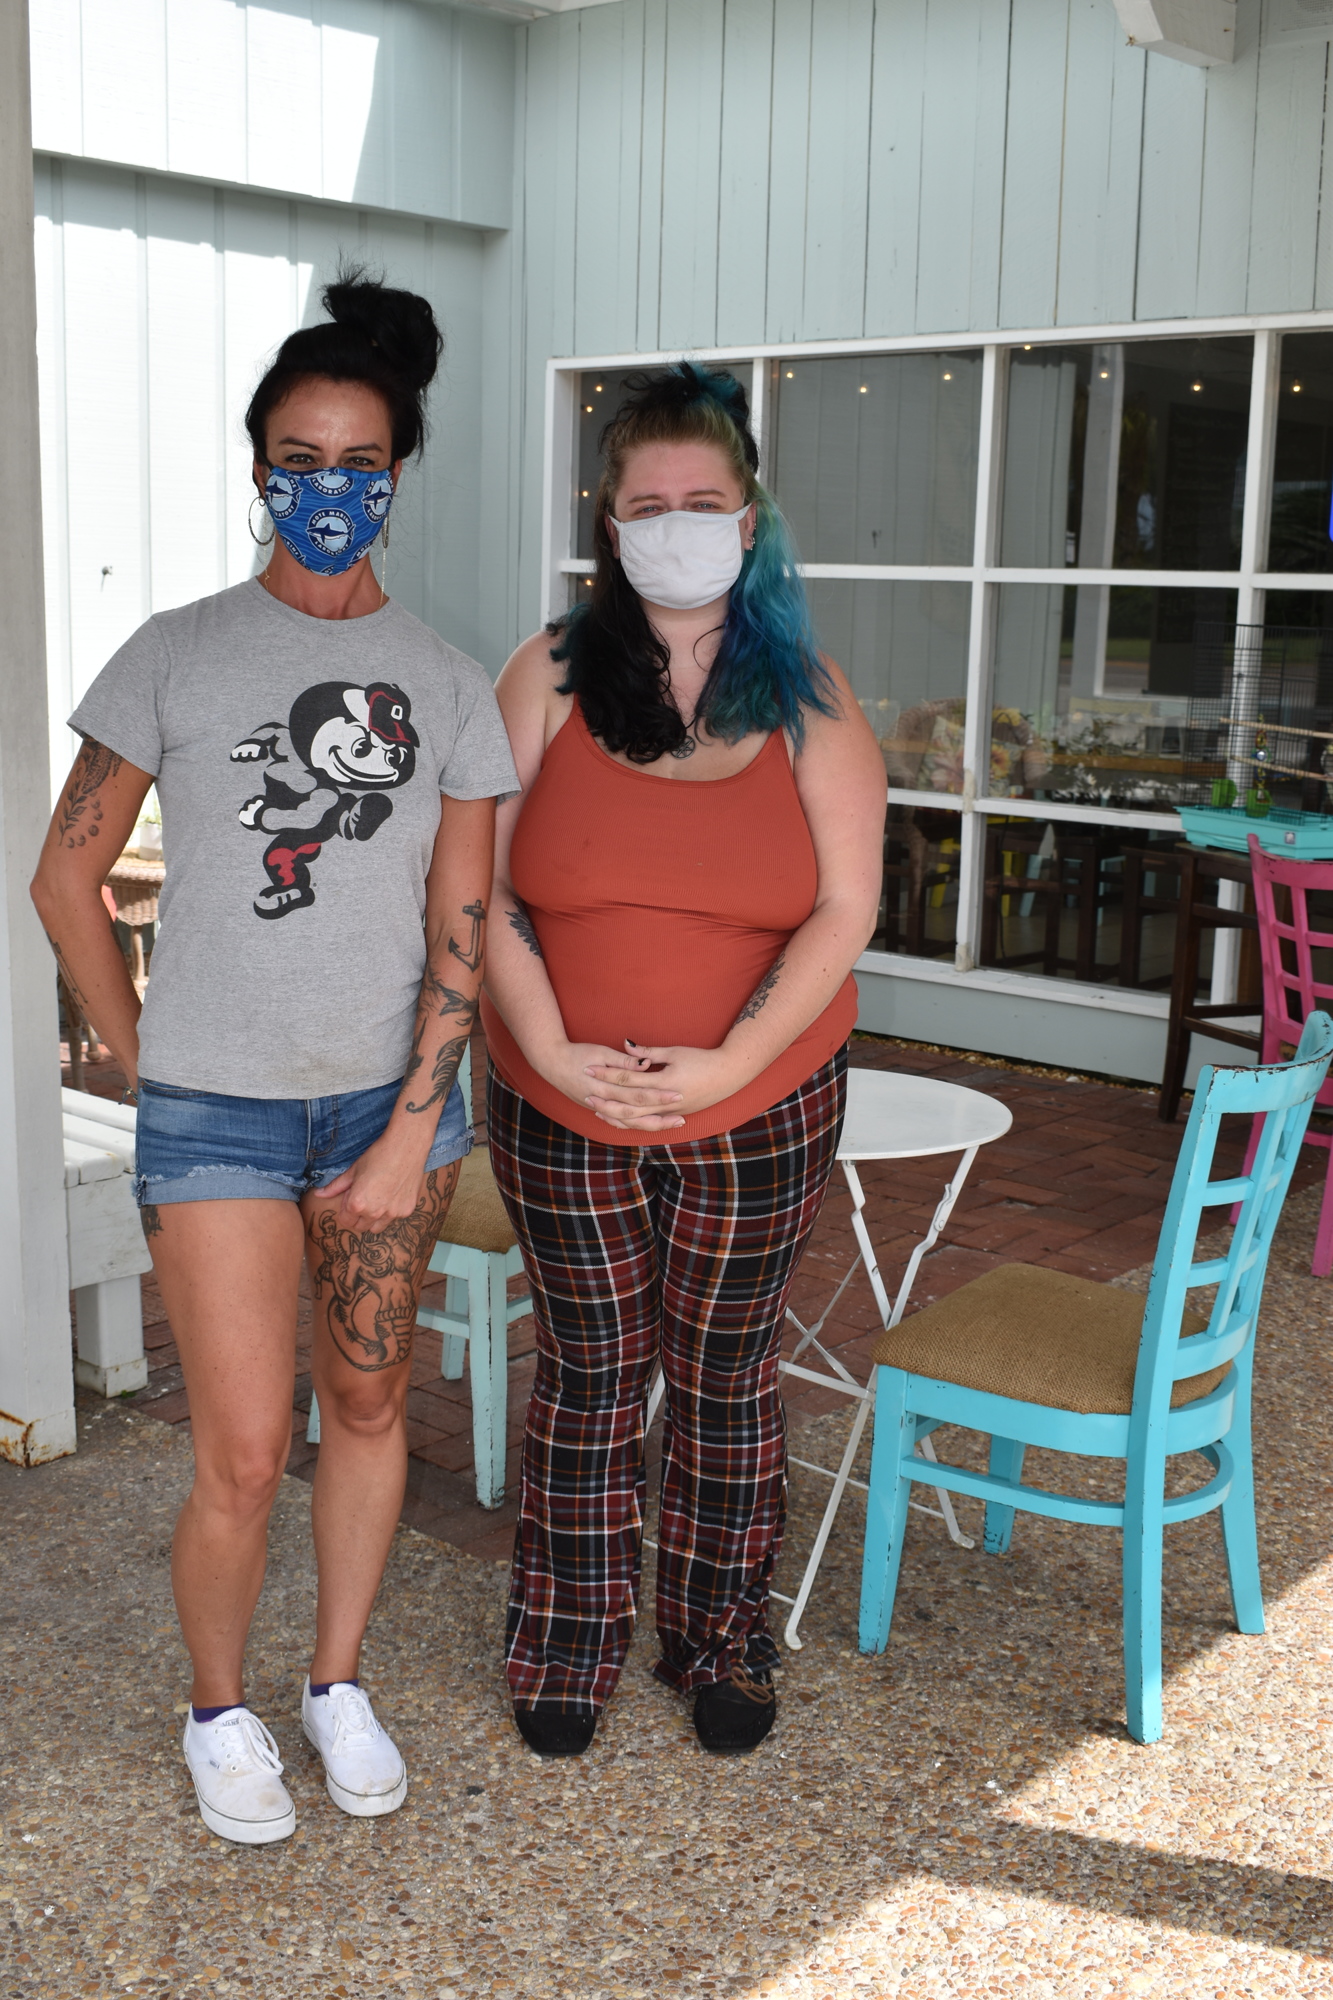 Turtle Coffee Bar owner Heather Gaus (left) and worker Tierra Garwood (right) said they've had to tell beachgoers they cannot park in the establishment's private parking lot.